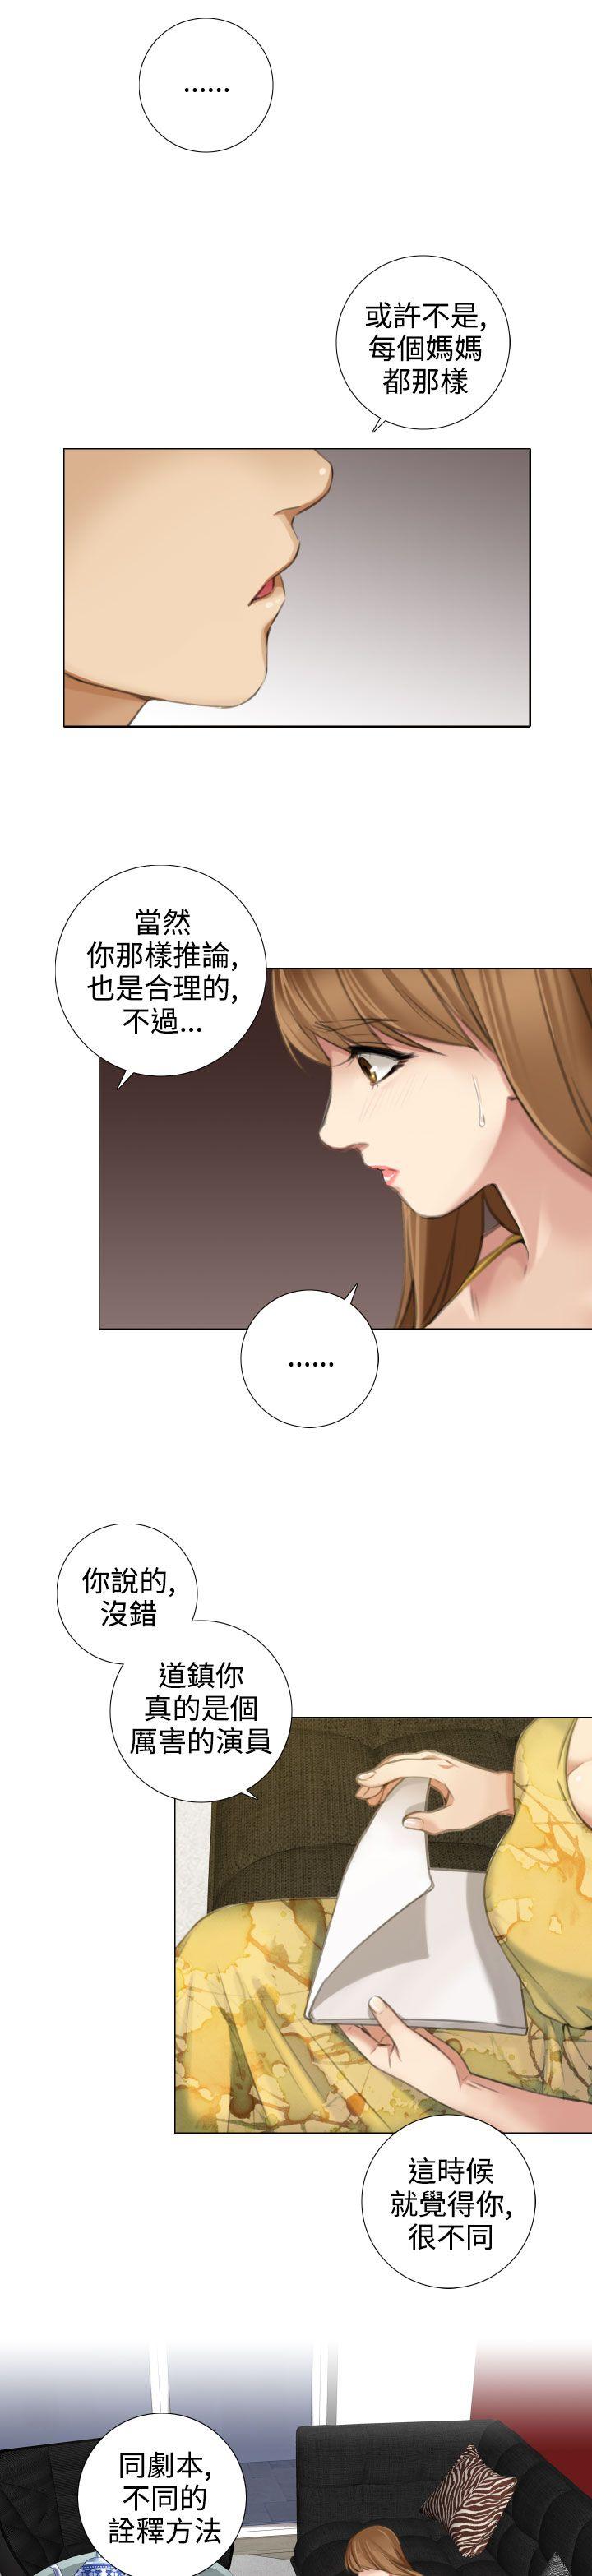 《TOUCH ME》漫画 第14话